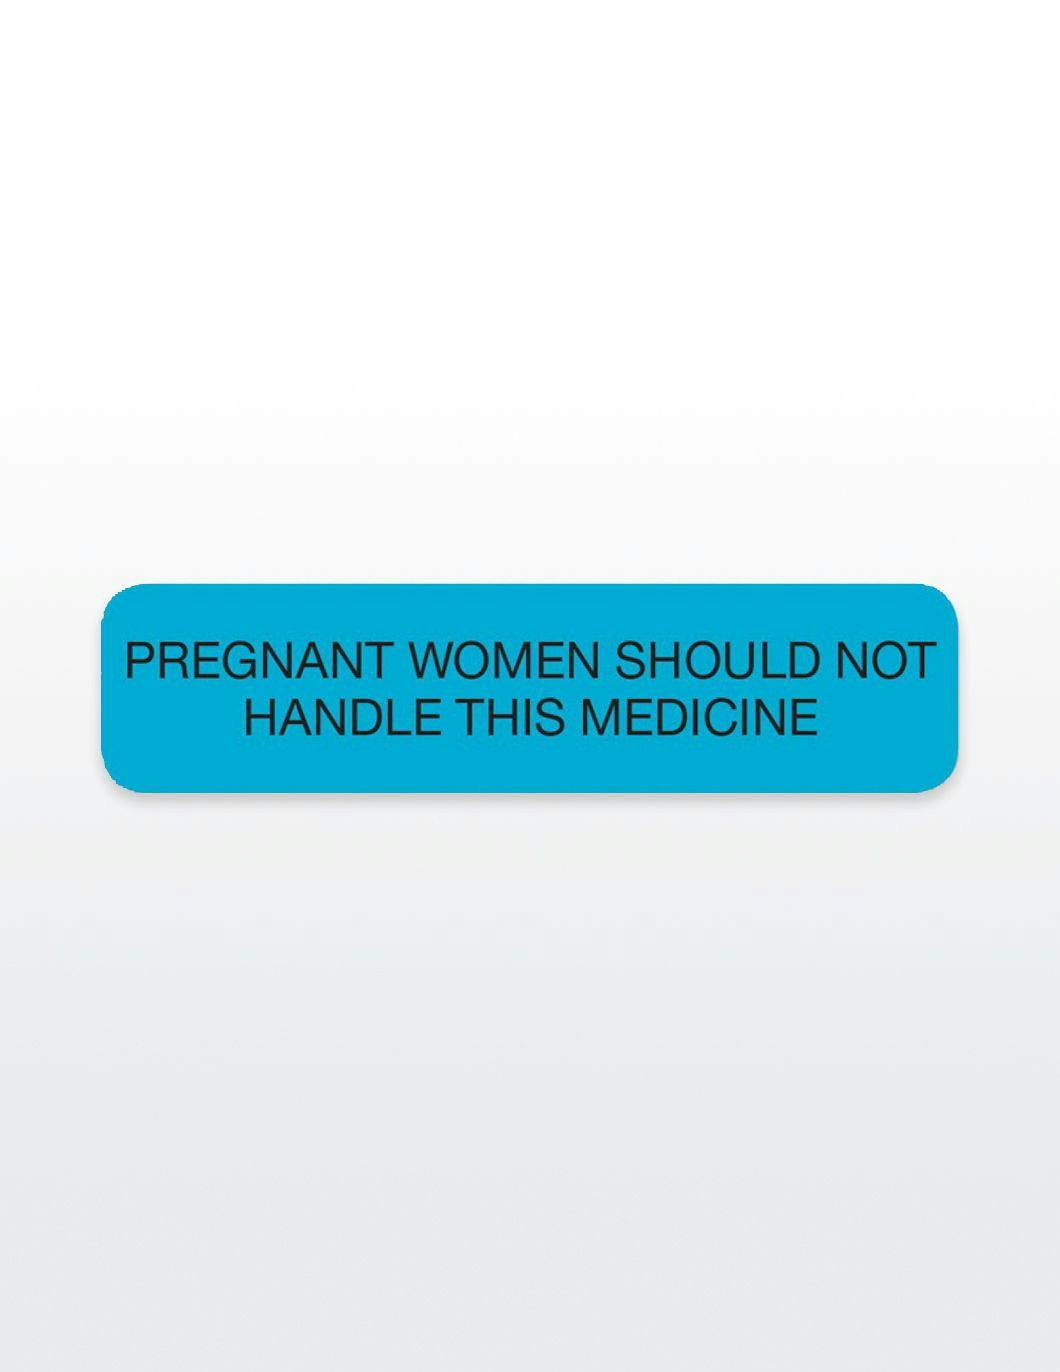 pregnant-women-should-not-handle-med-stickers